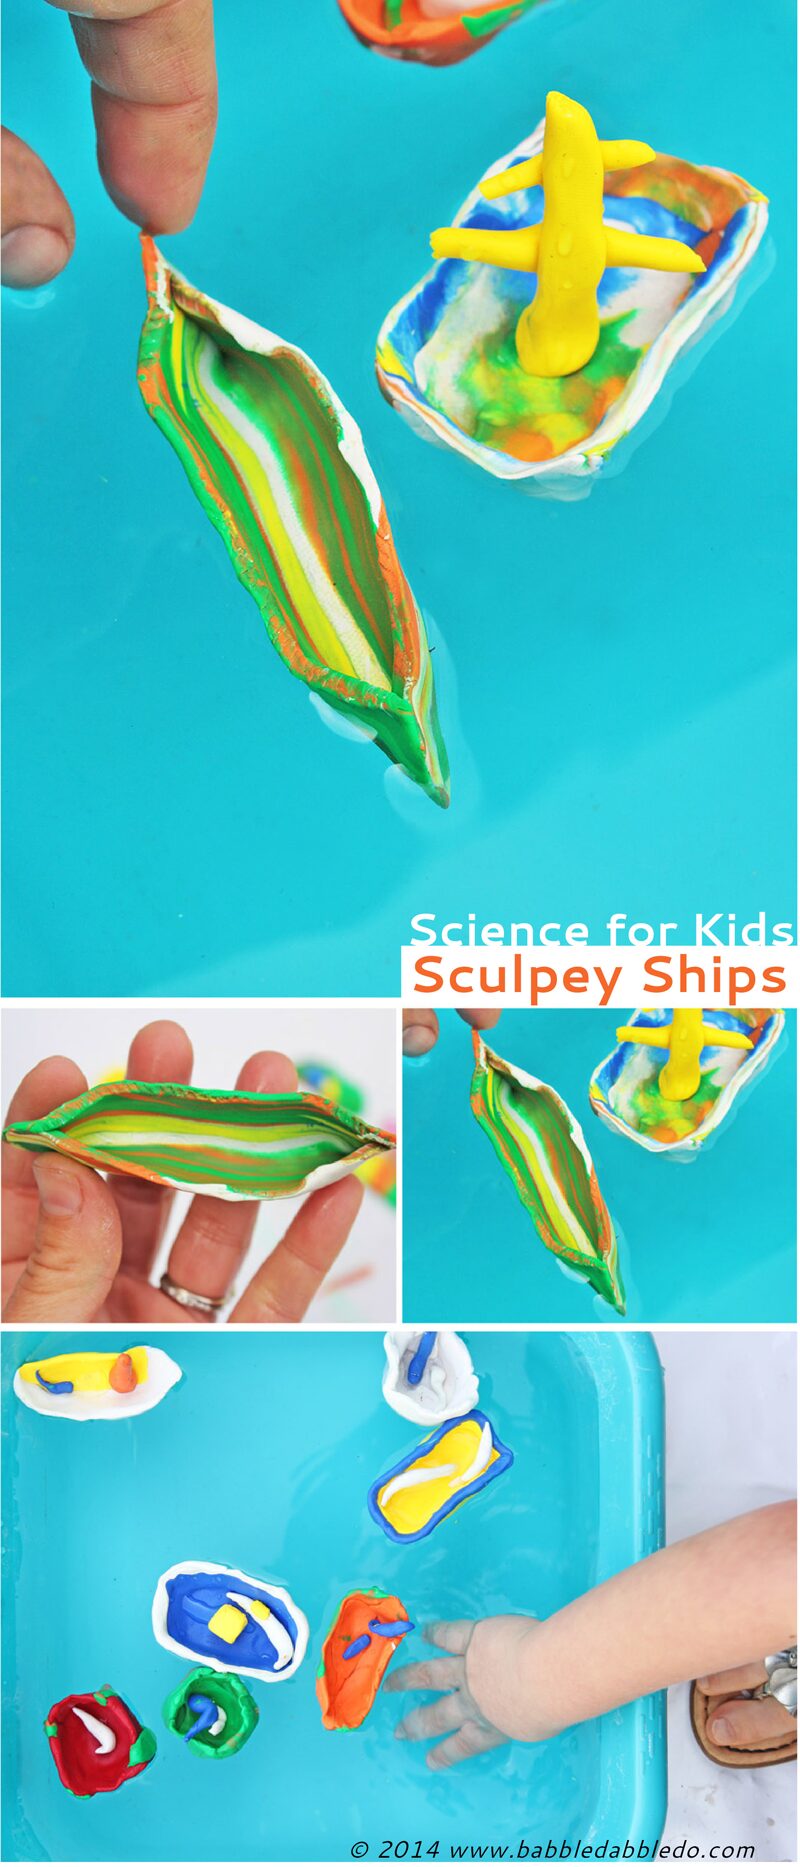 Science for kids: Sink or Float? Make Sculpey ships and try this classic science experiment for kids!